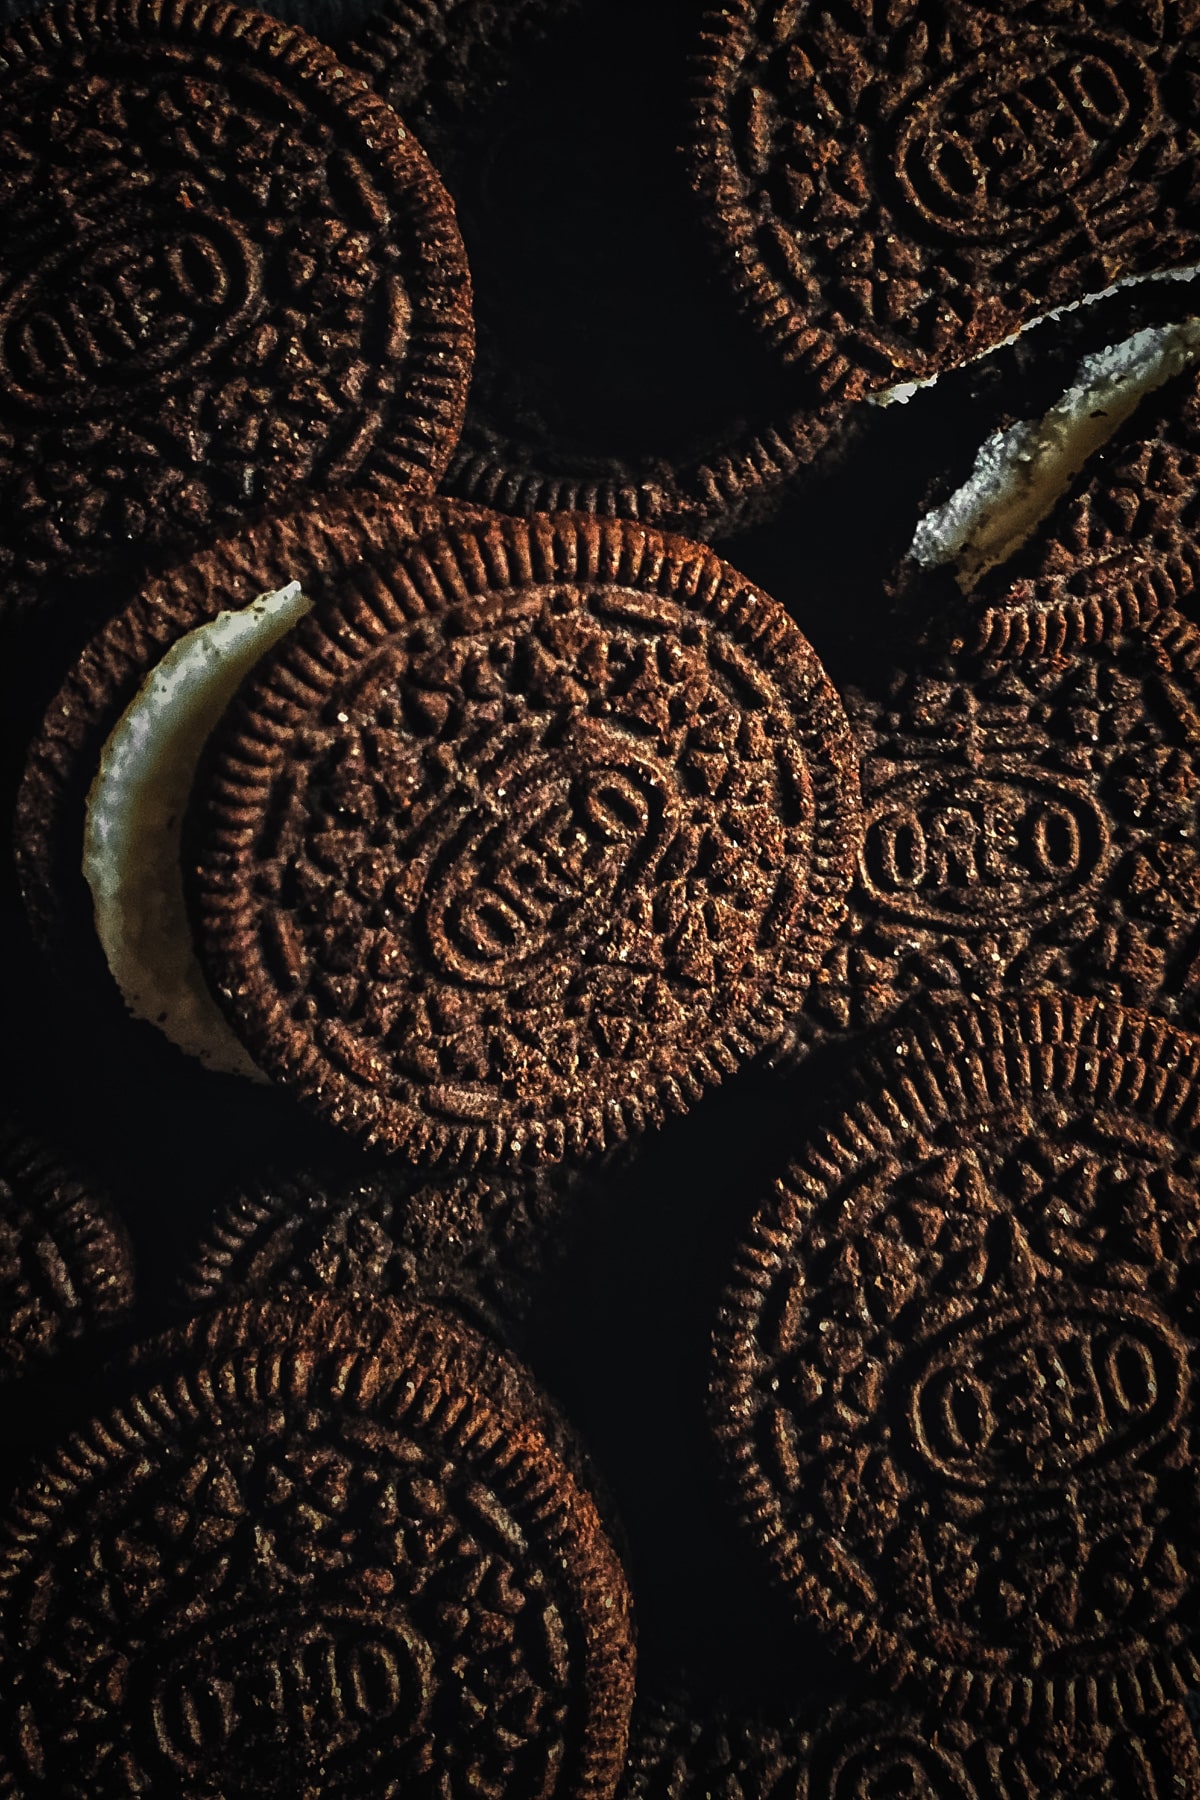 Pile of several Oreo cookies.